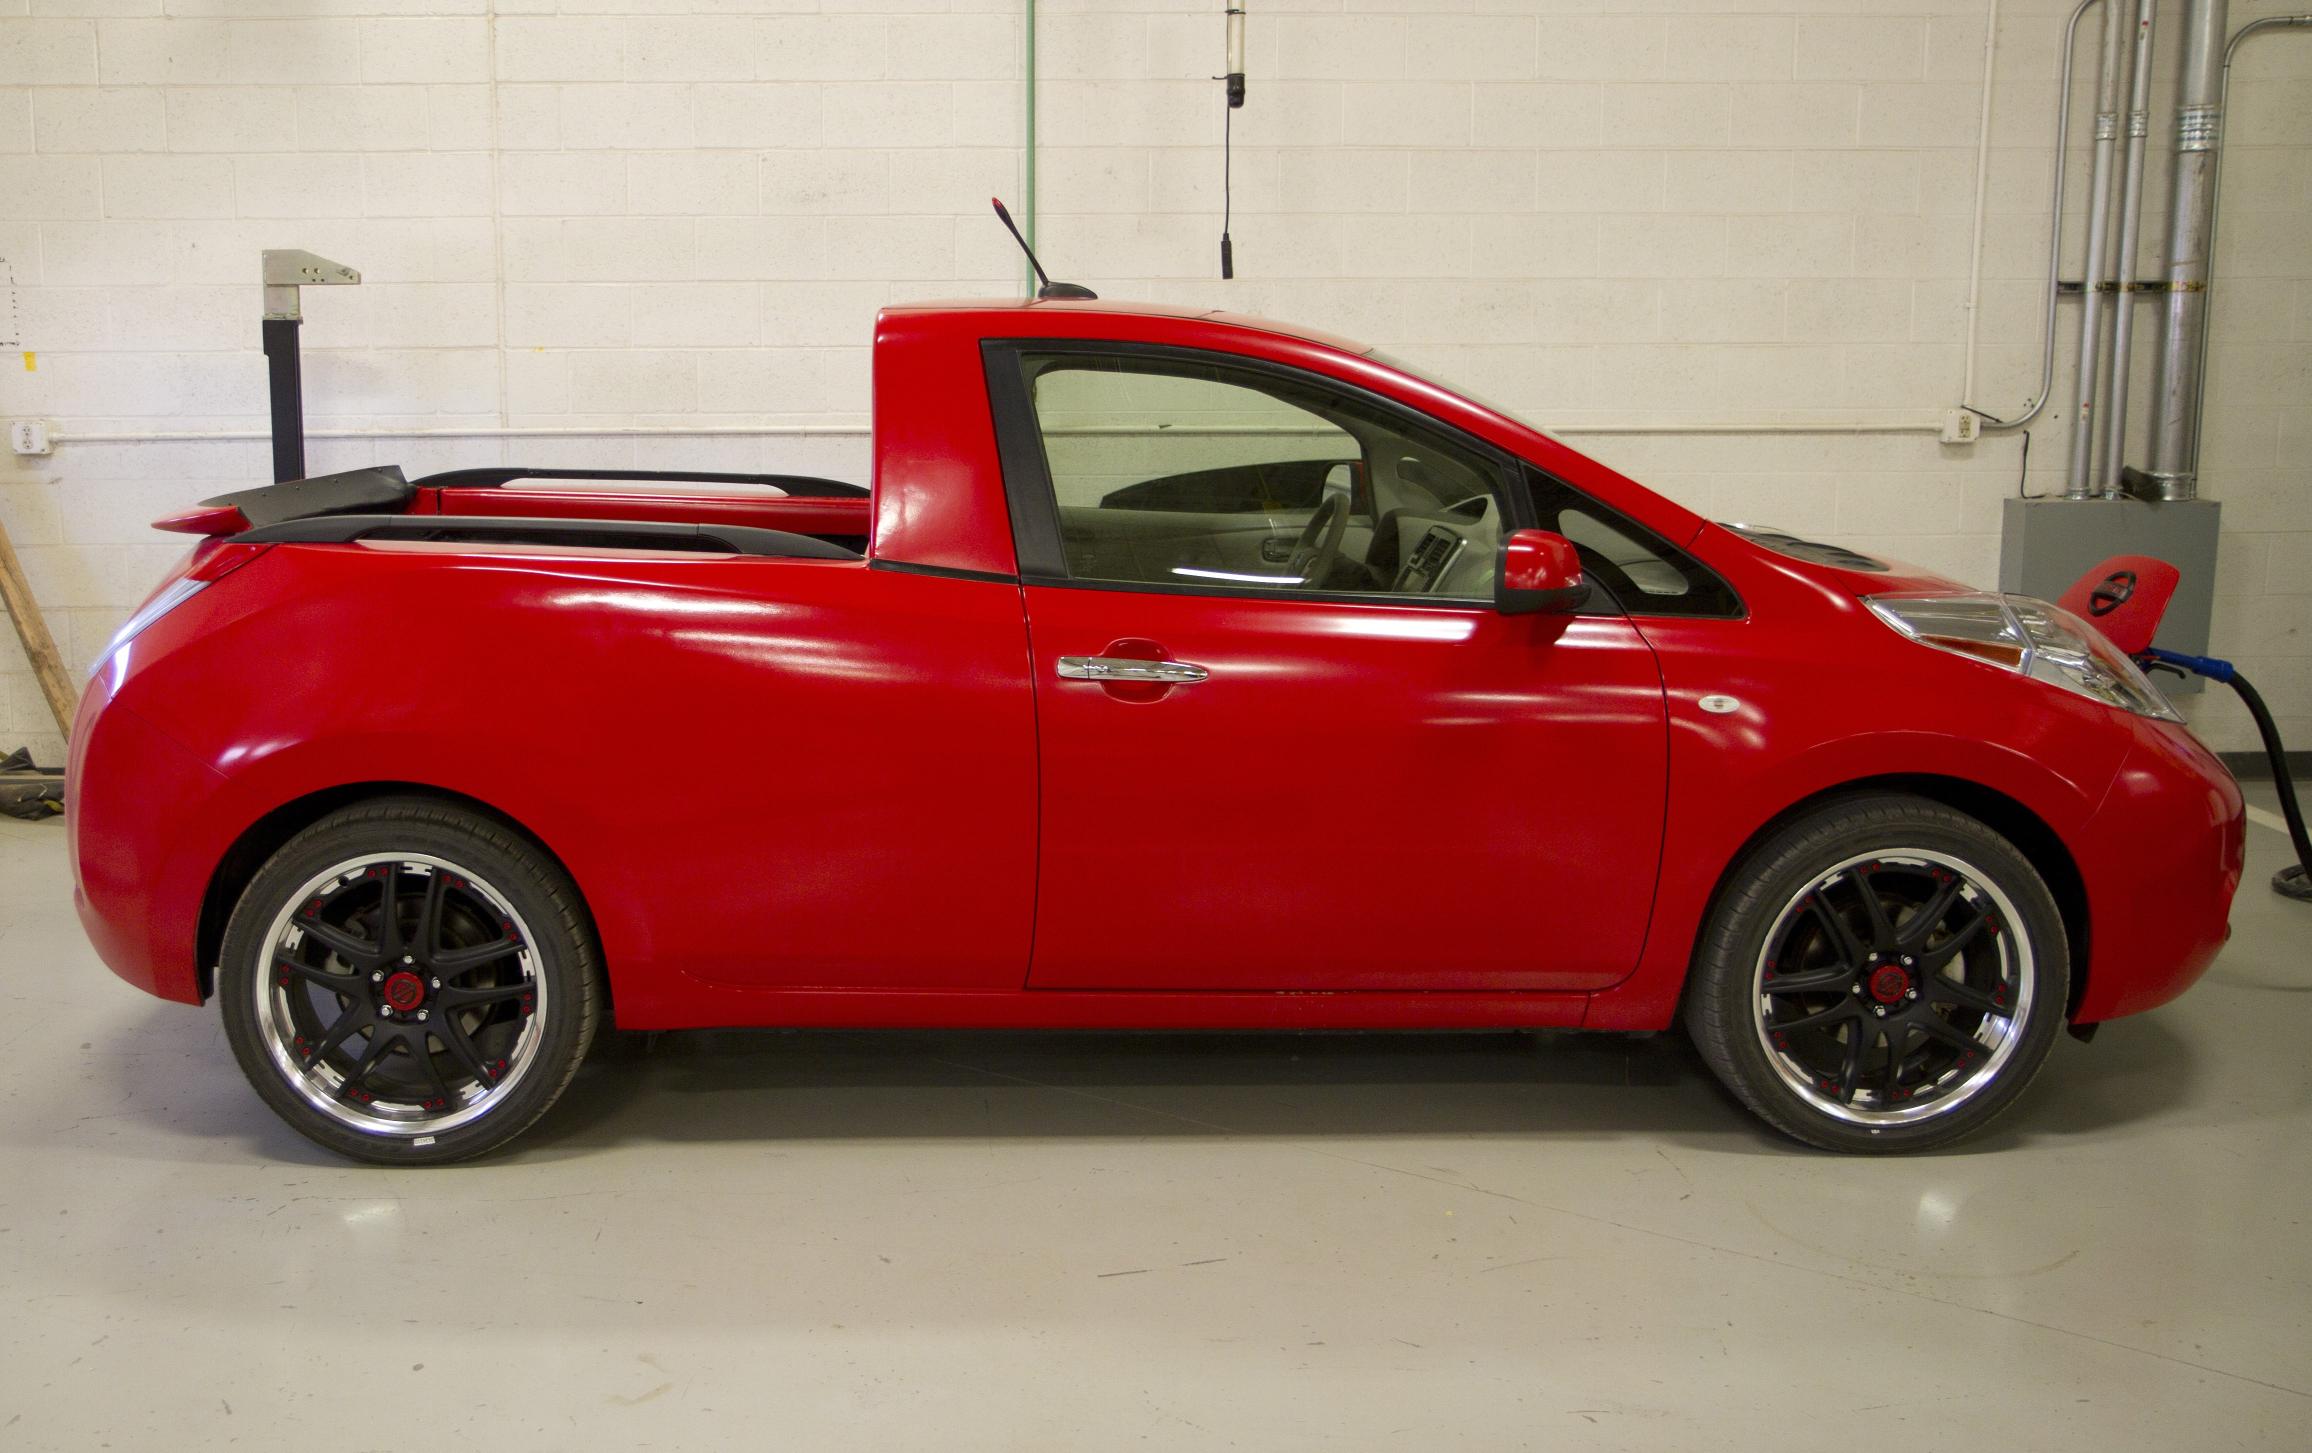 Check out the Nissan Leaf Pickup Truck - Seriously! - The Fast ...